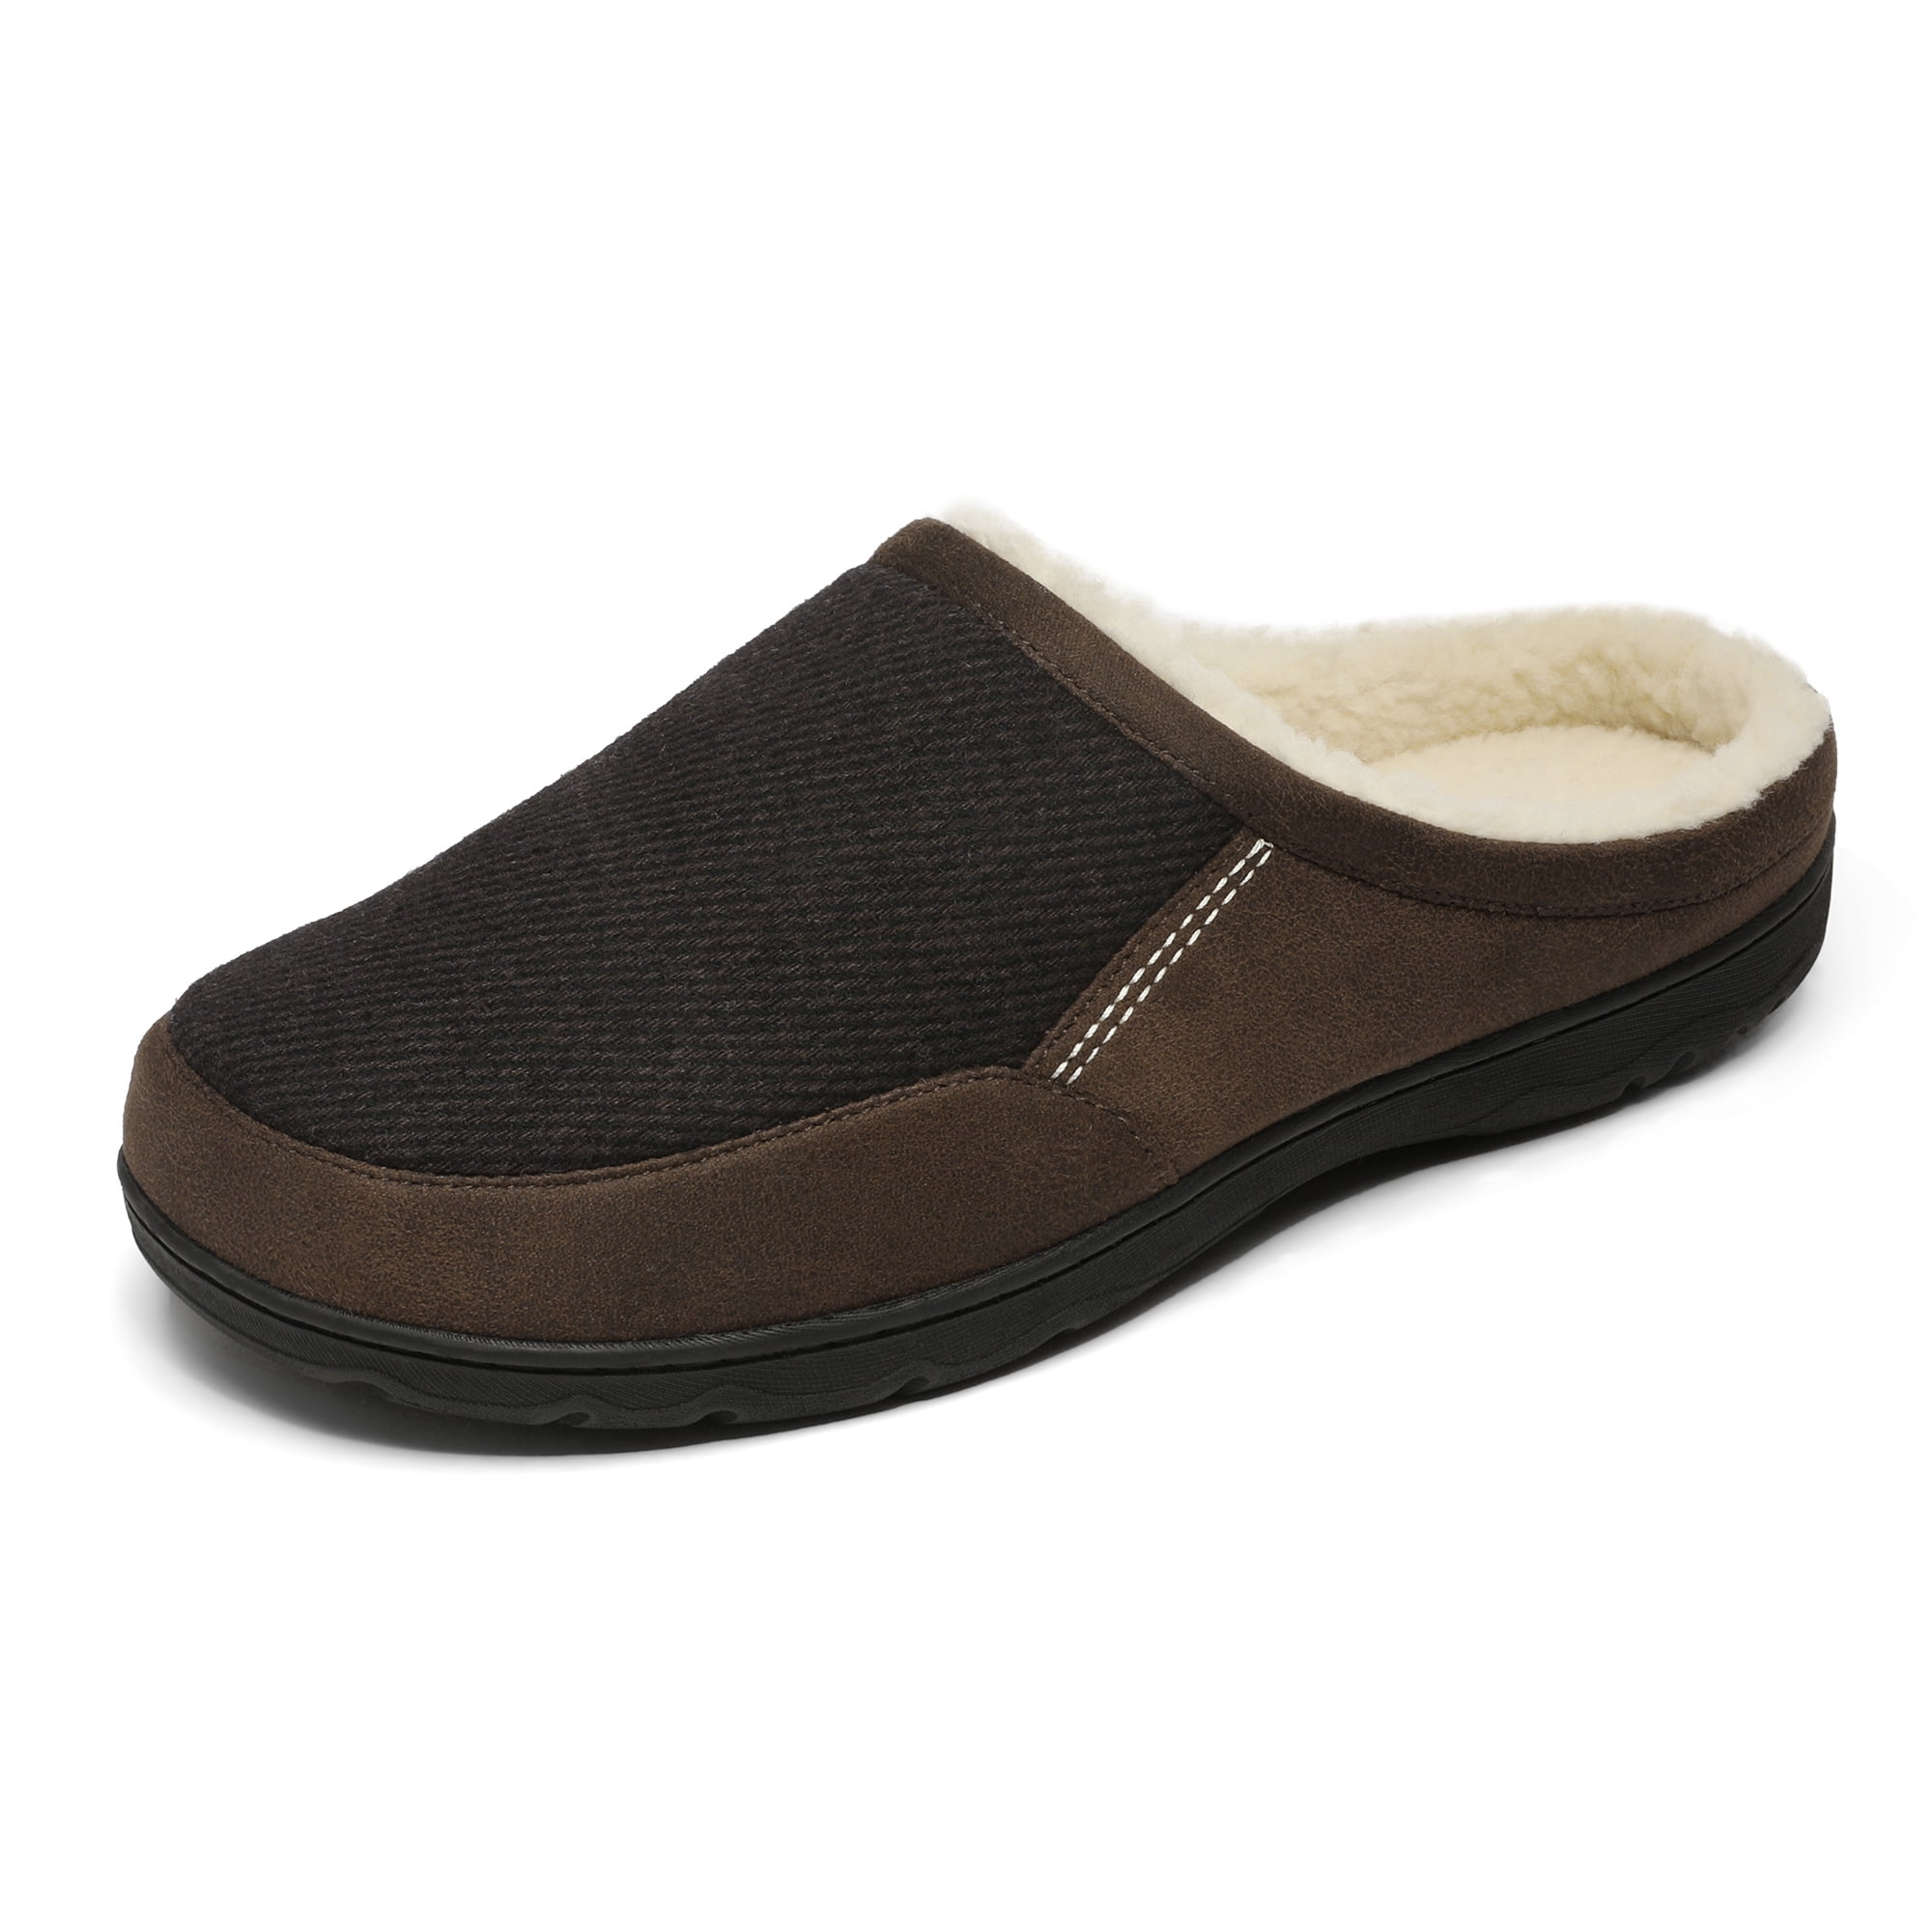 Padders Mens Slippers Harry - Memory Foam Insoles - Soft Suede - FOOTCARE UK